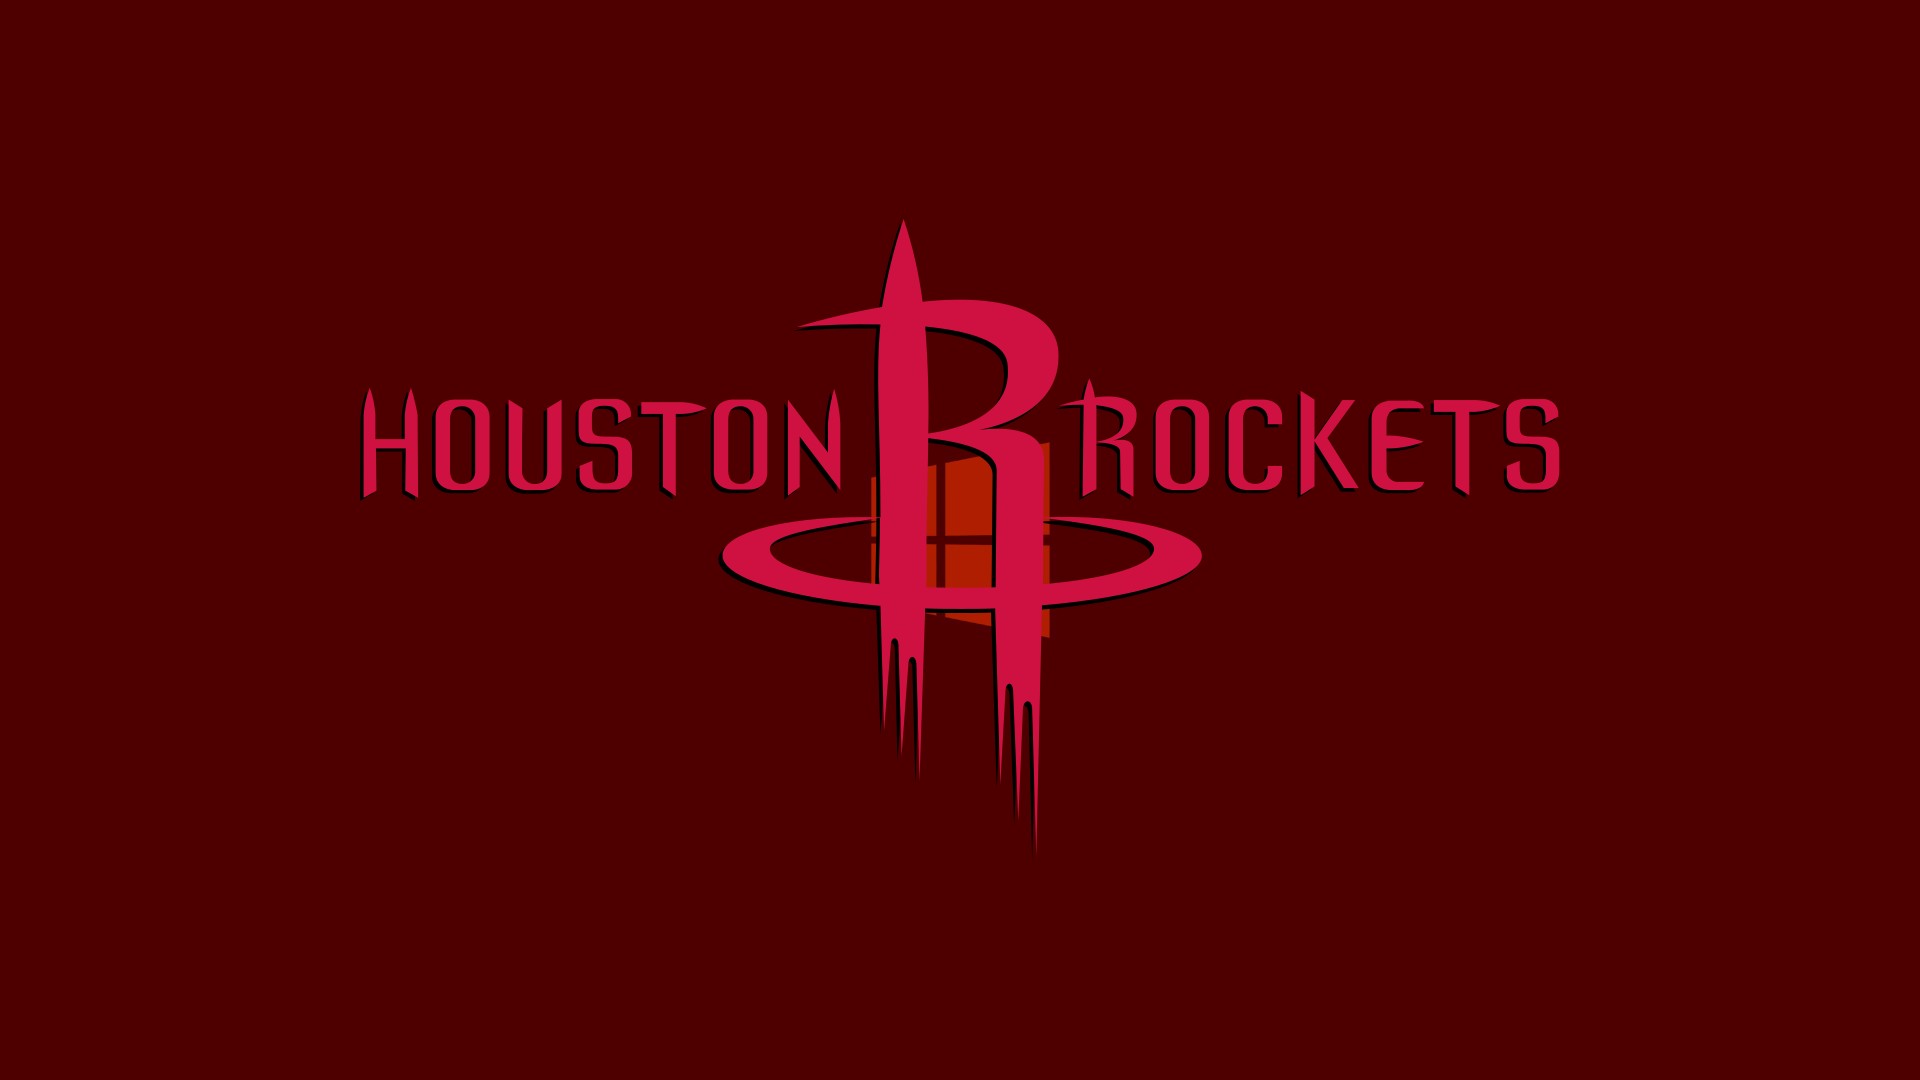 Houston Rockets For PC Wallpaper with image dimensions 1920x1080 pixel. You can make this wallpaper for your Desktop Computer Backgrounds, Windows or Mac Screensavers, iPhone Lock screen, Tablet or Android and another Mobile Phone device